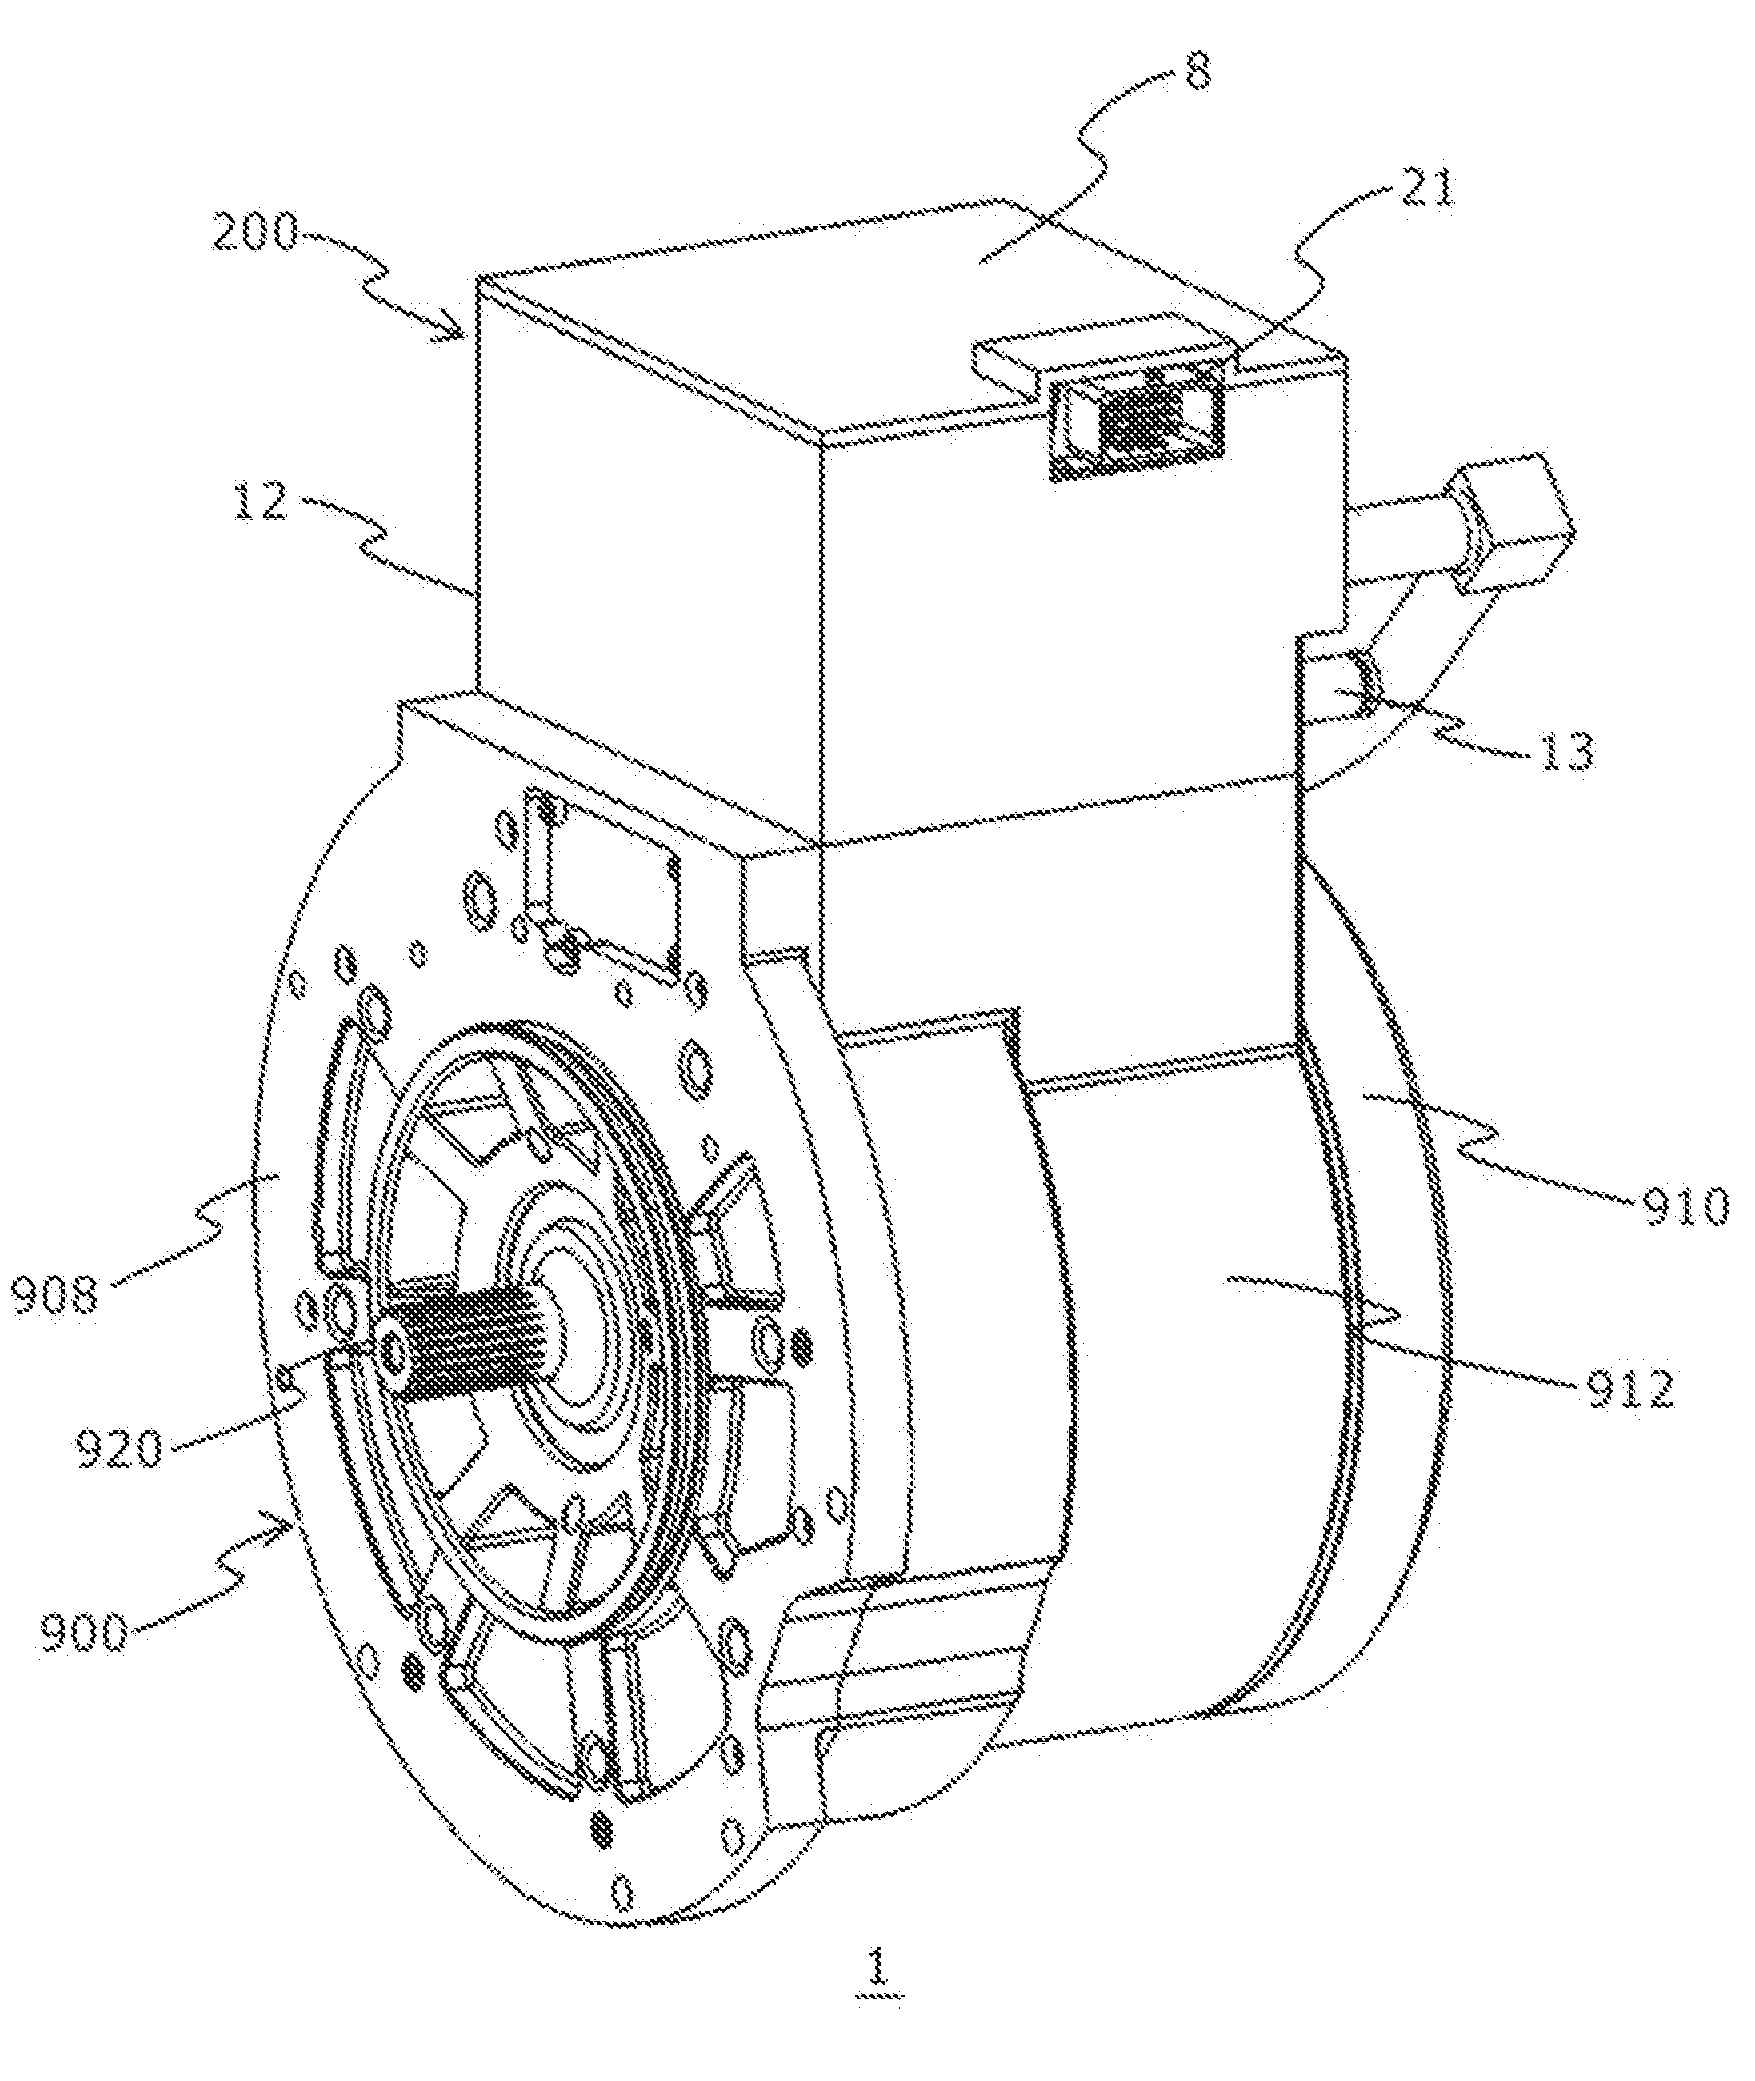 Mechanical-Electrical Integrated Electric Drive System